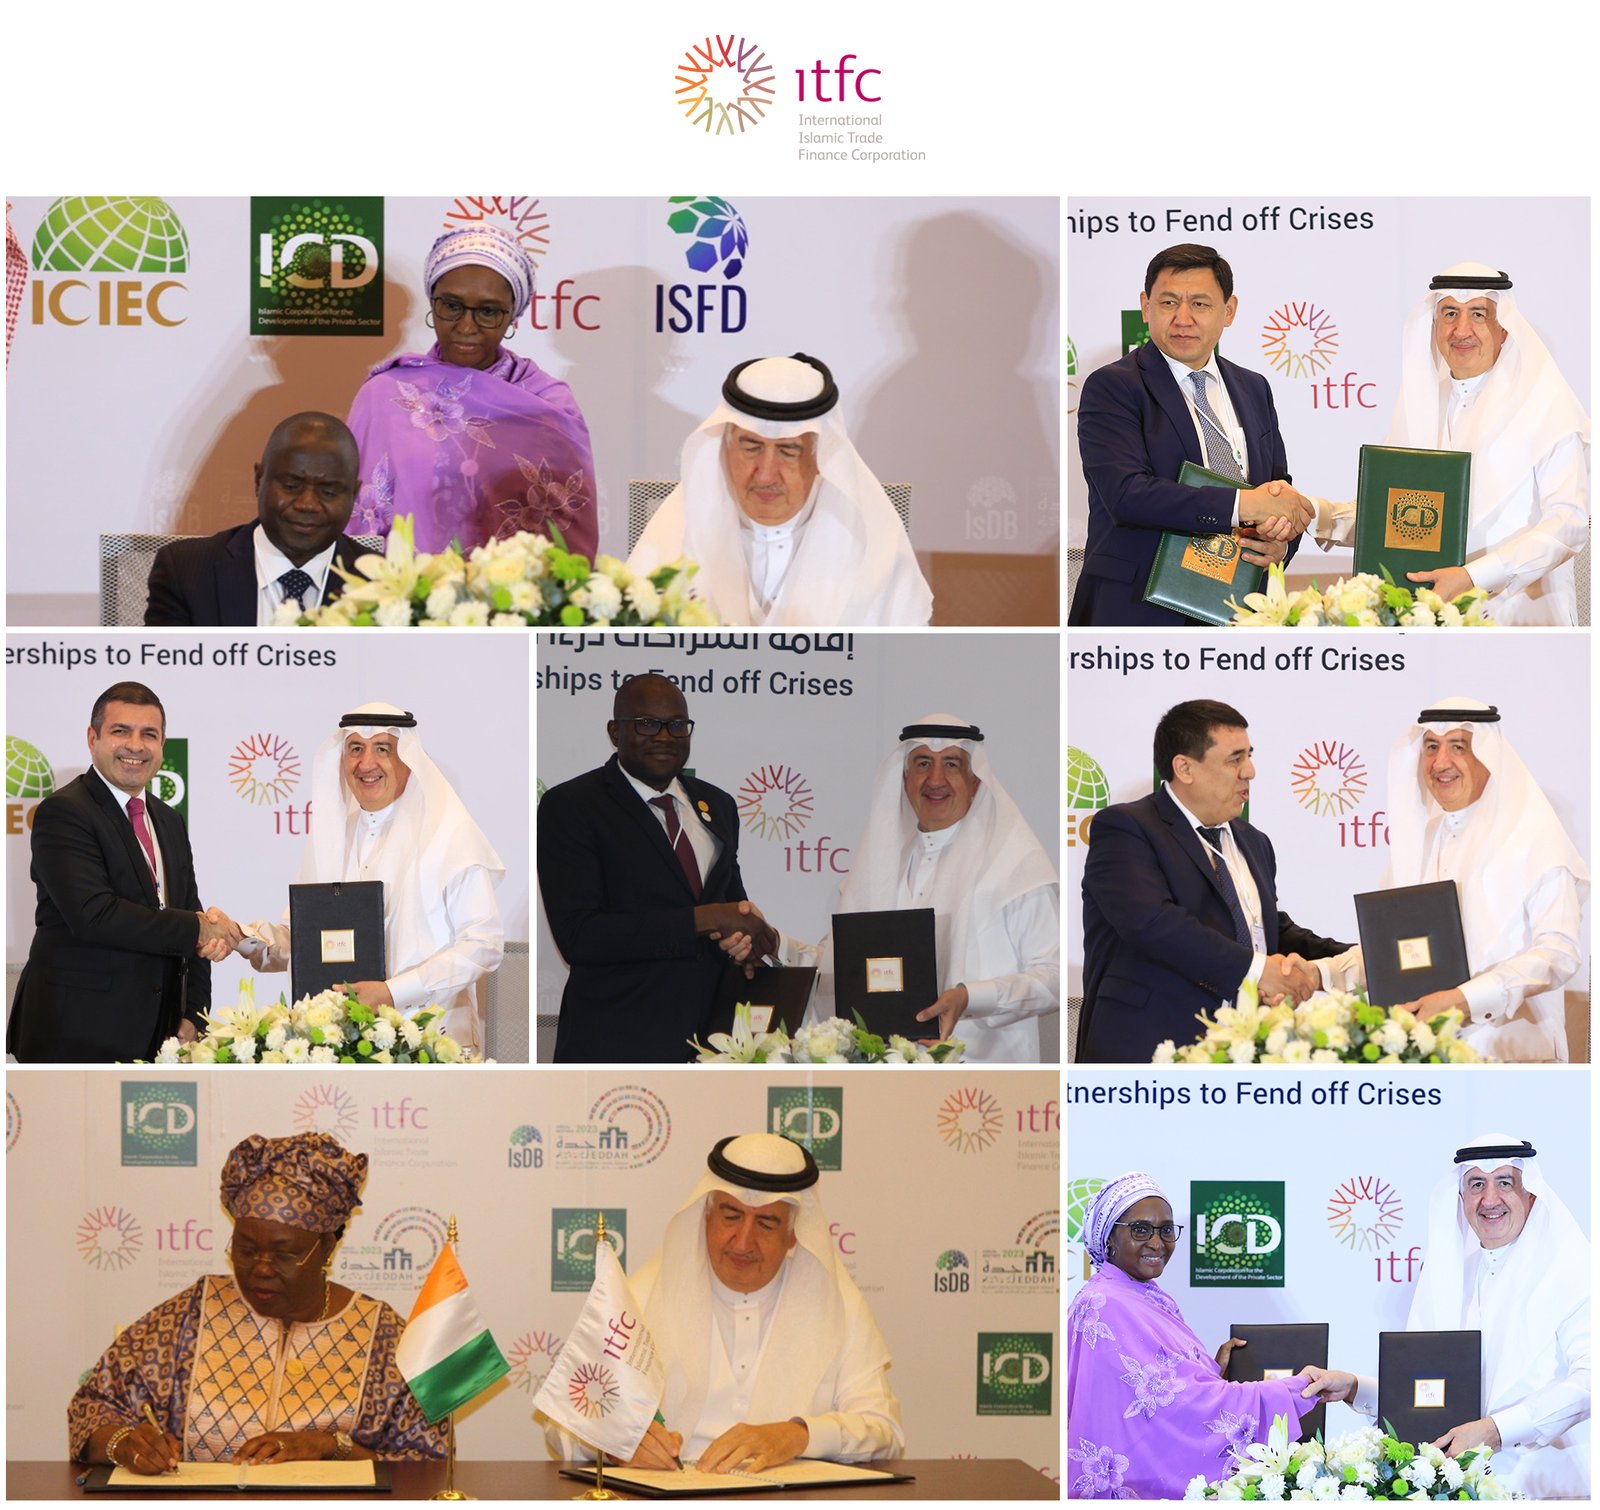 ITFC Signs Seven Agreements Totaling US$ 1.2 Billion With Burkina Faso, Cote d’Ivoire, Nigeria, and Partner Banks